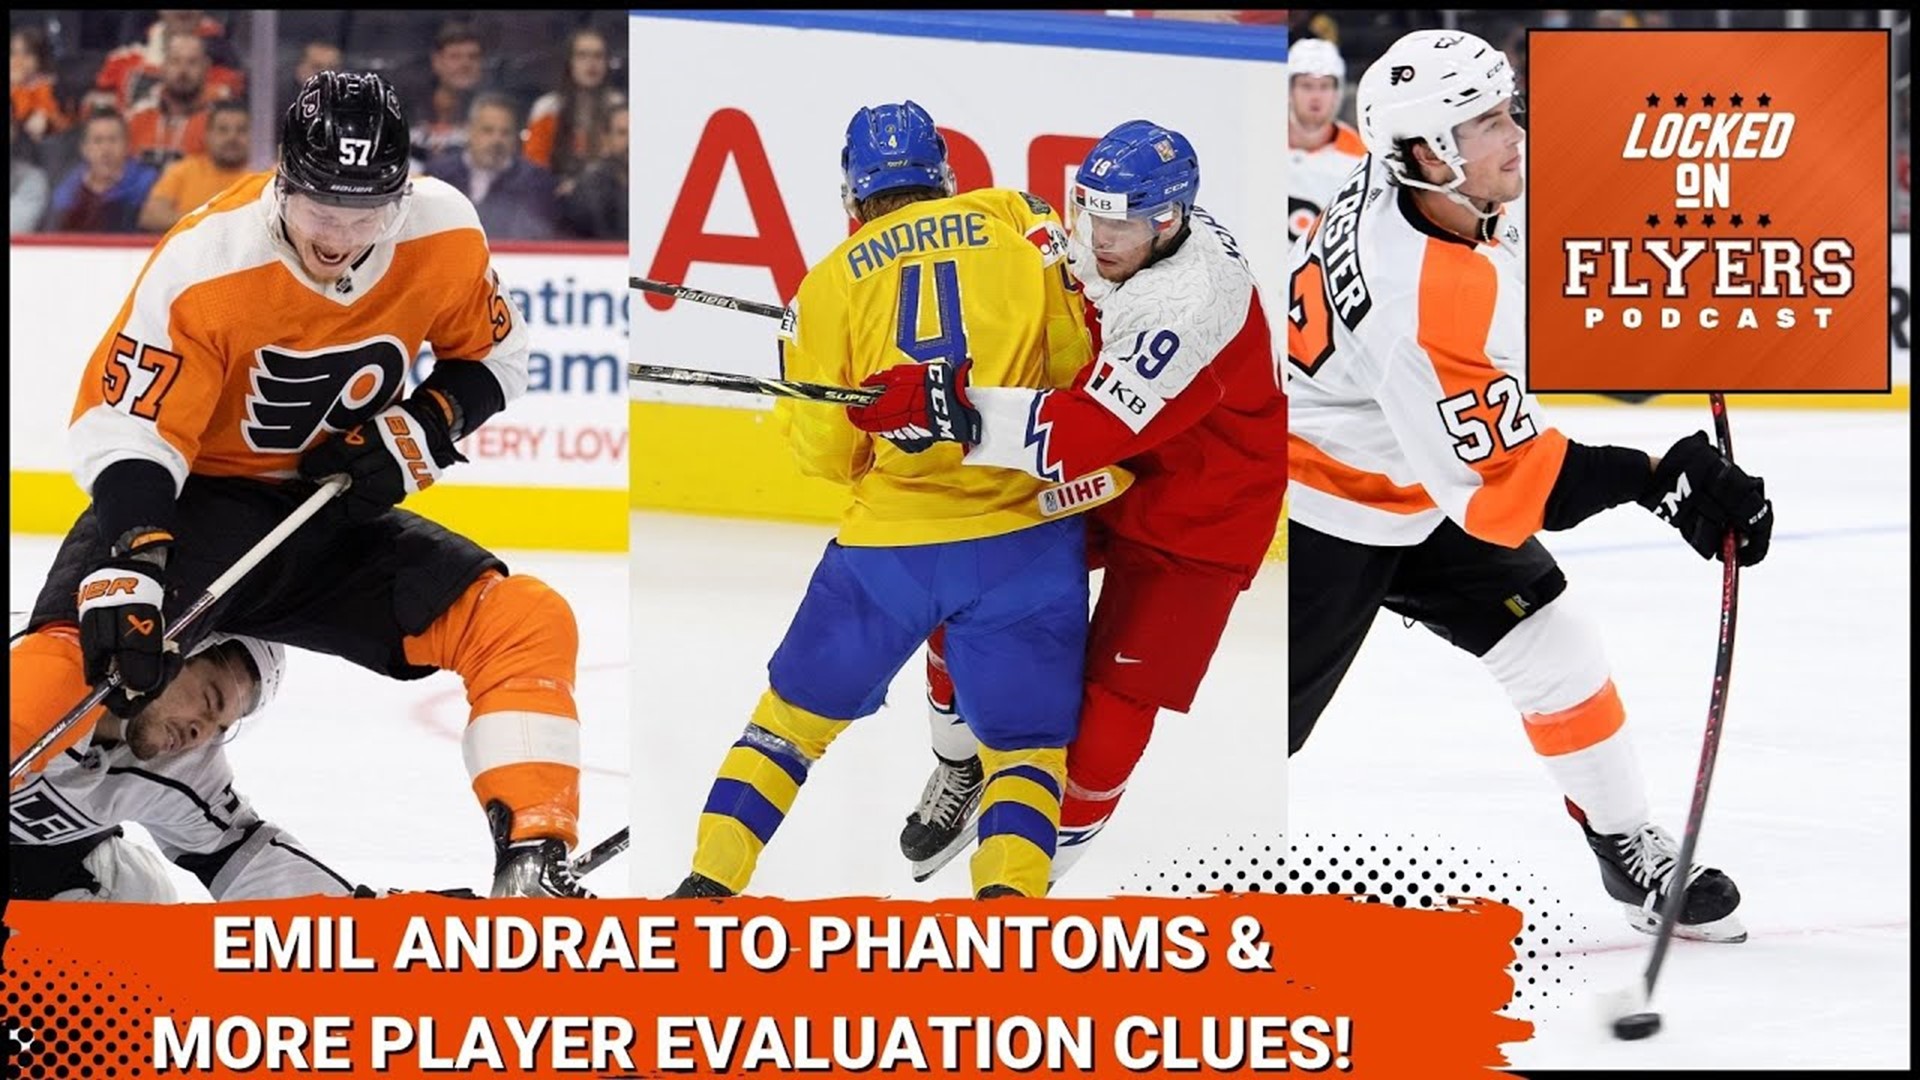 Russ & Rachel discuss the tryout deal for Emil Andrae in Lehigh Valley. We then look at the other items on our to do list for player evaluation.